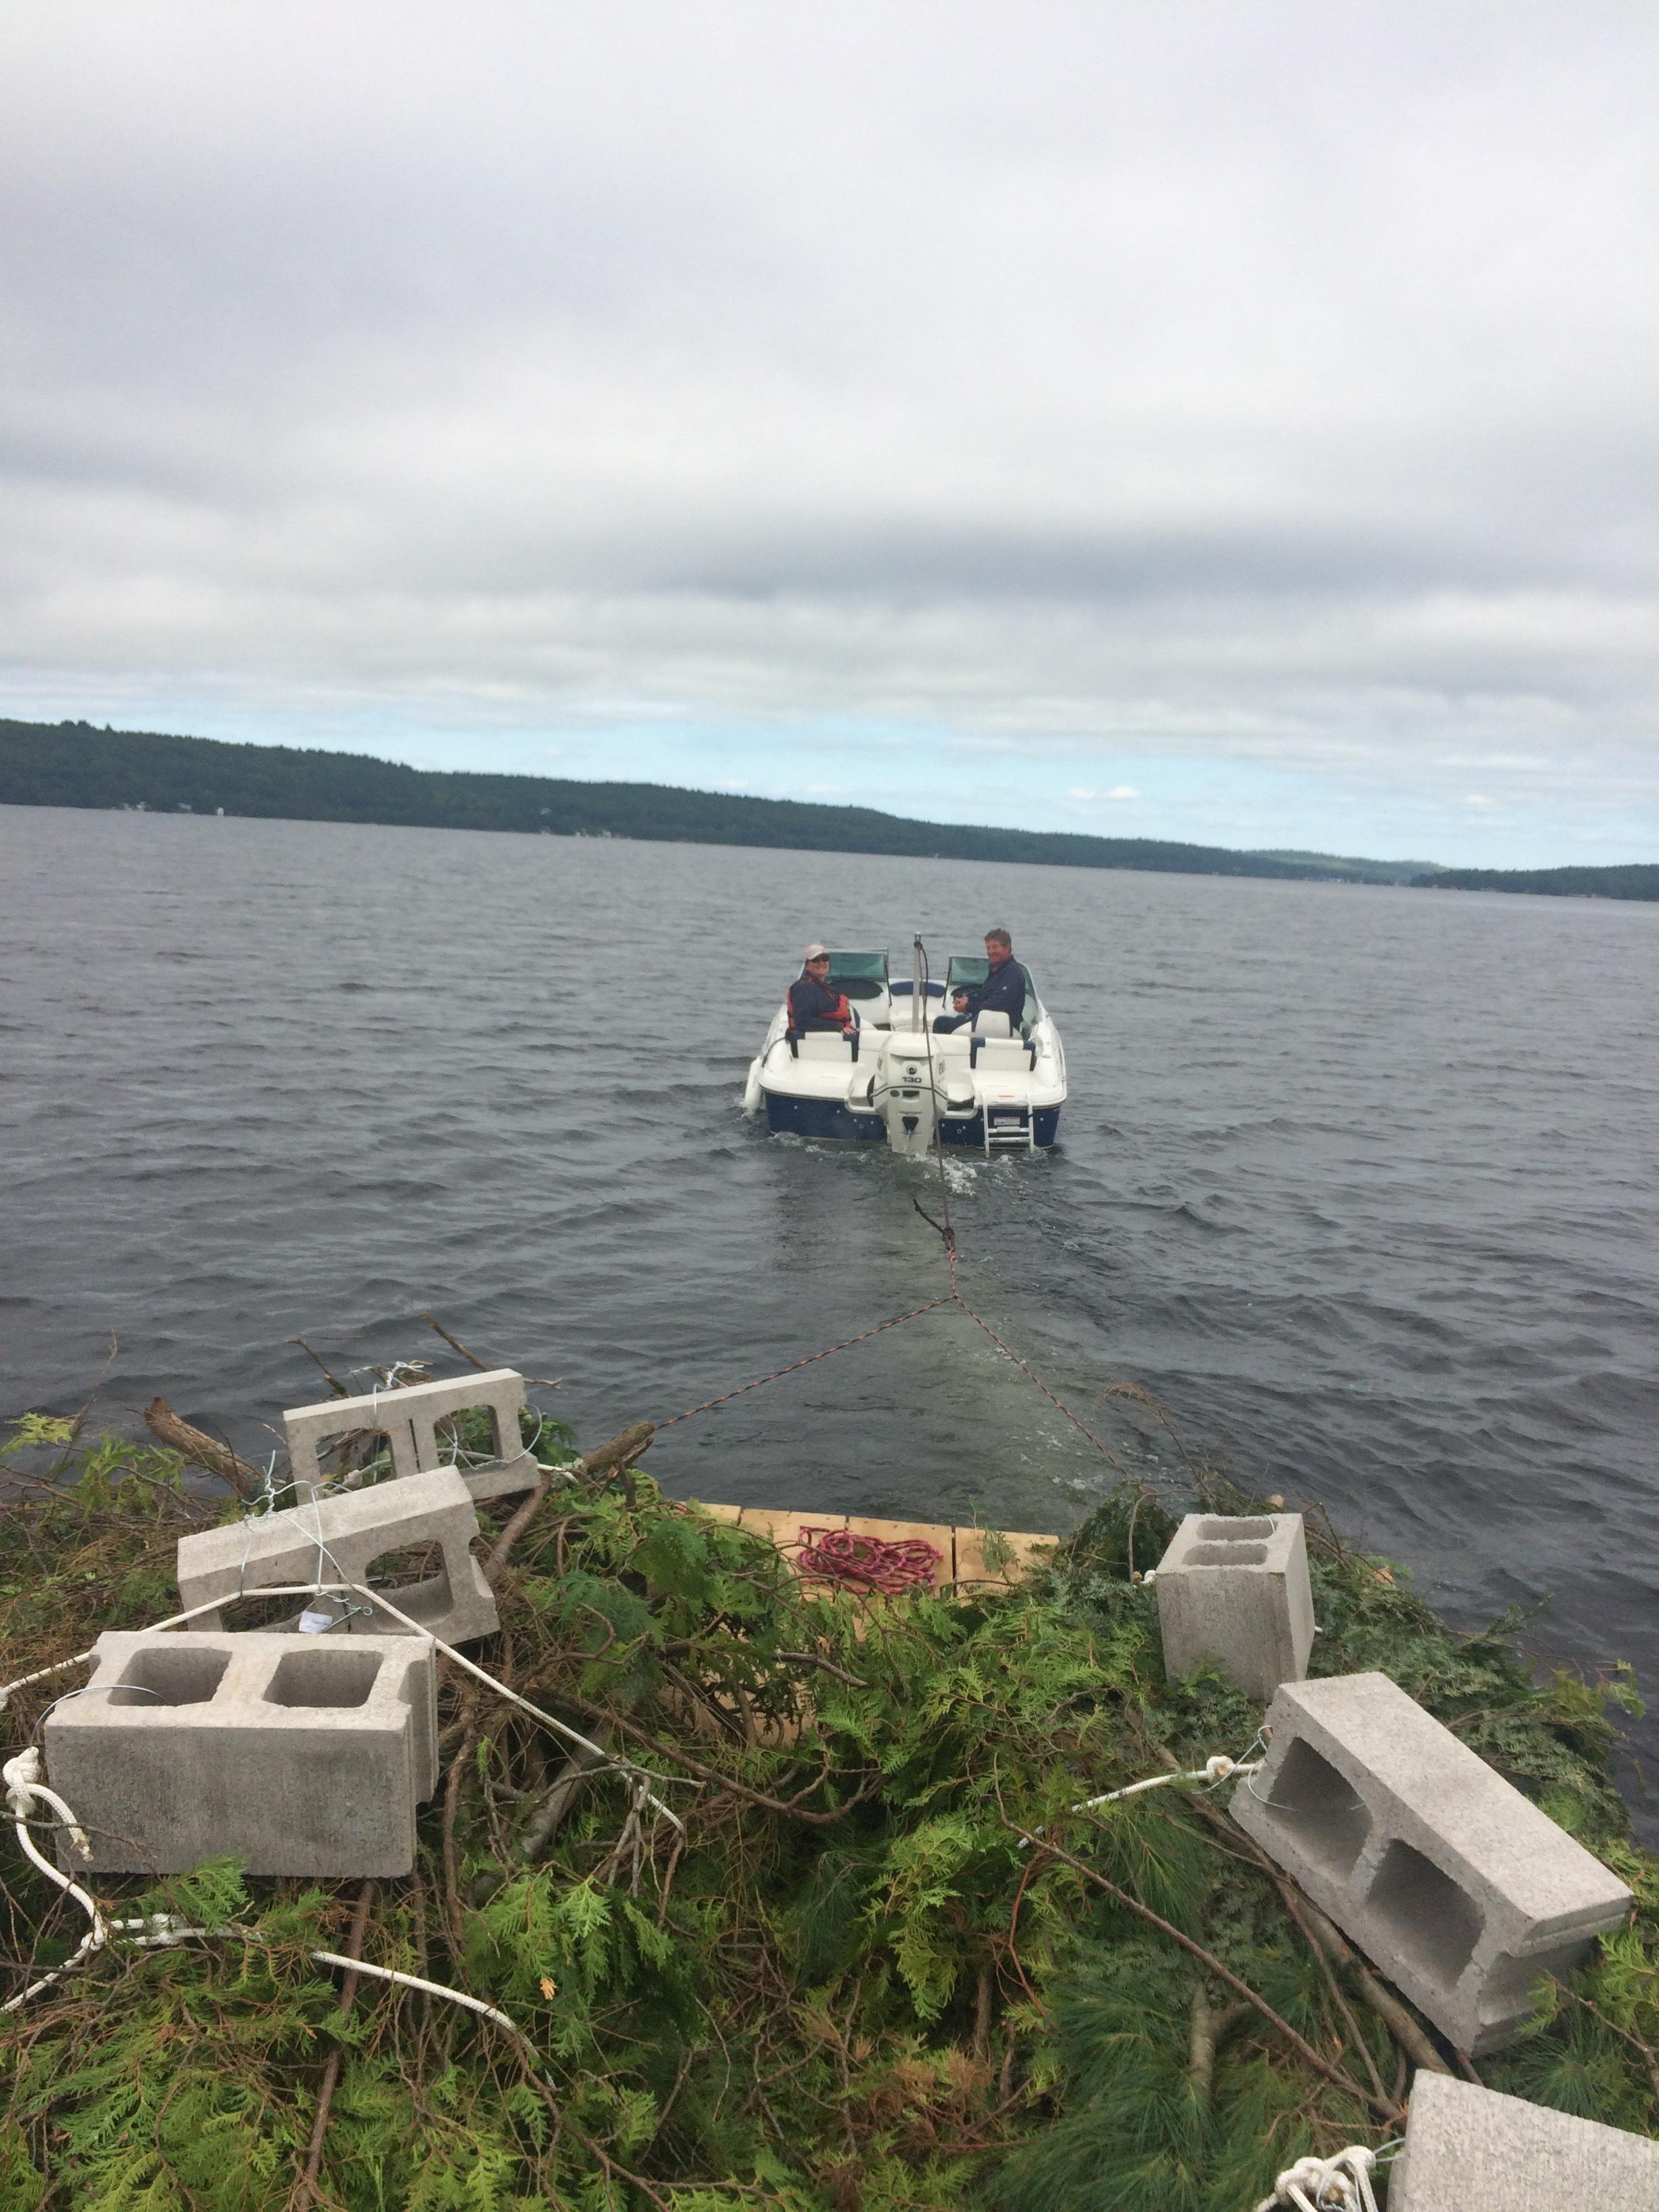 MPOA V.P. Bob Reid & Lake Steward Vern Haggerty, along with Melissa Dakers of Watersheds Canada towing the bundles to the various pre-determined places on the lake